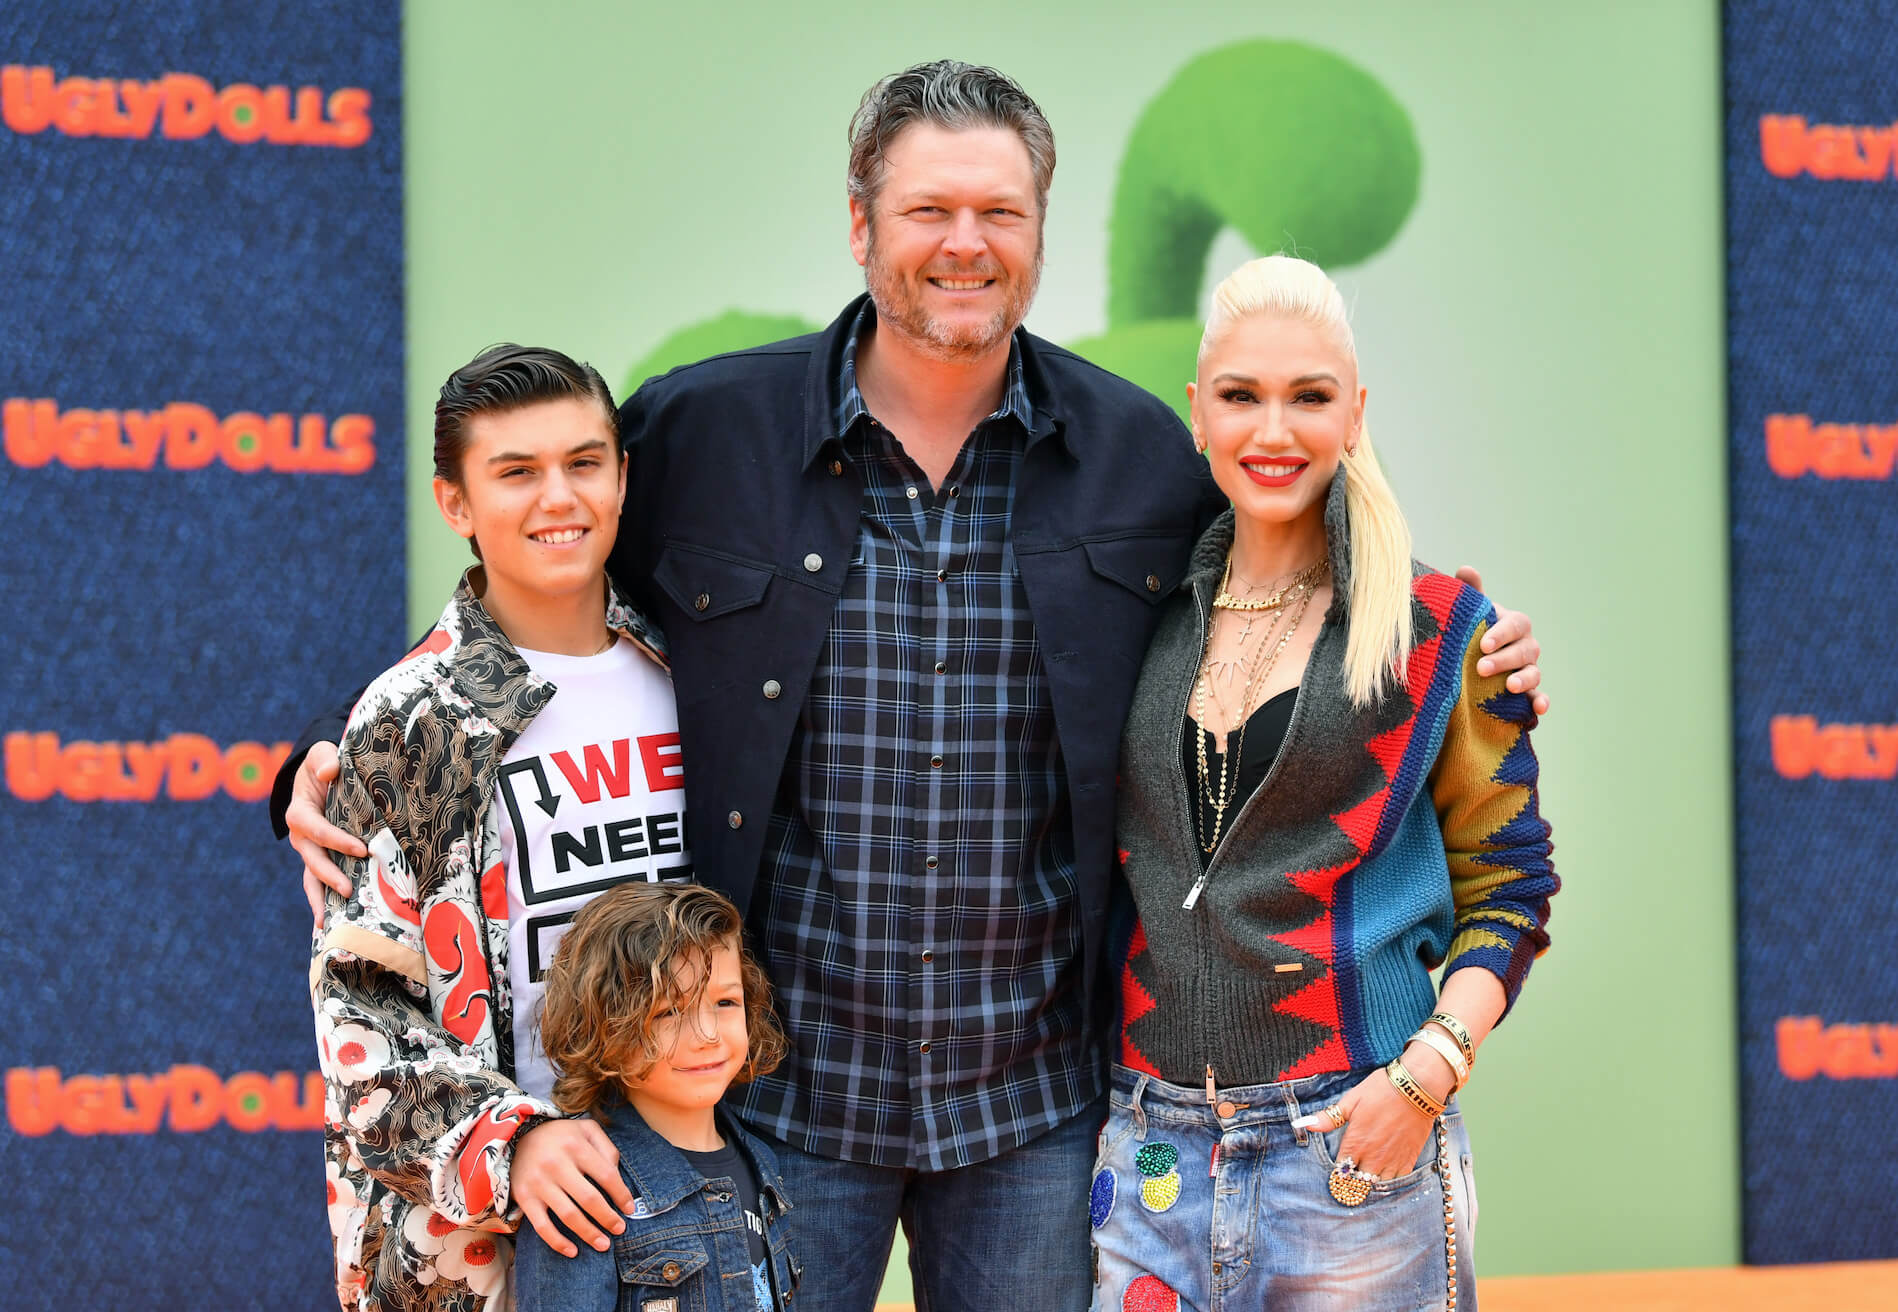 Kingston Rossdale, Apollo Bowie Flynn Rossdale, Blake Shelton, and Gwen Stefani posing at a movie premiere together